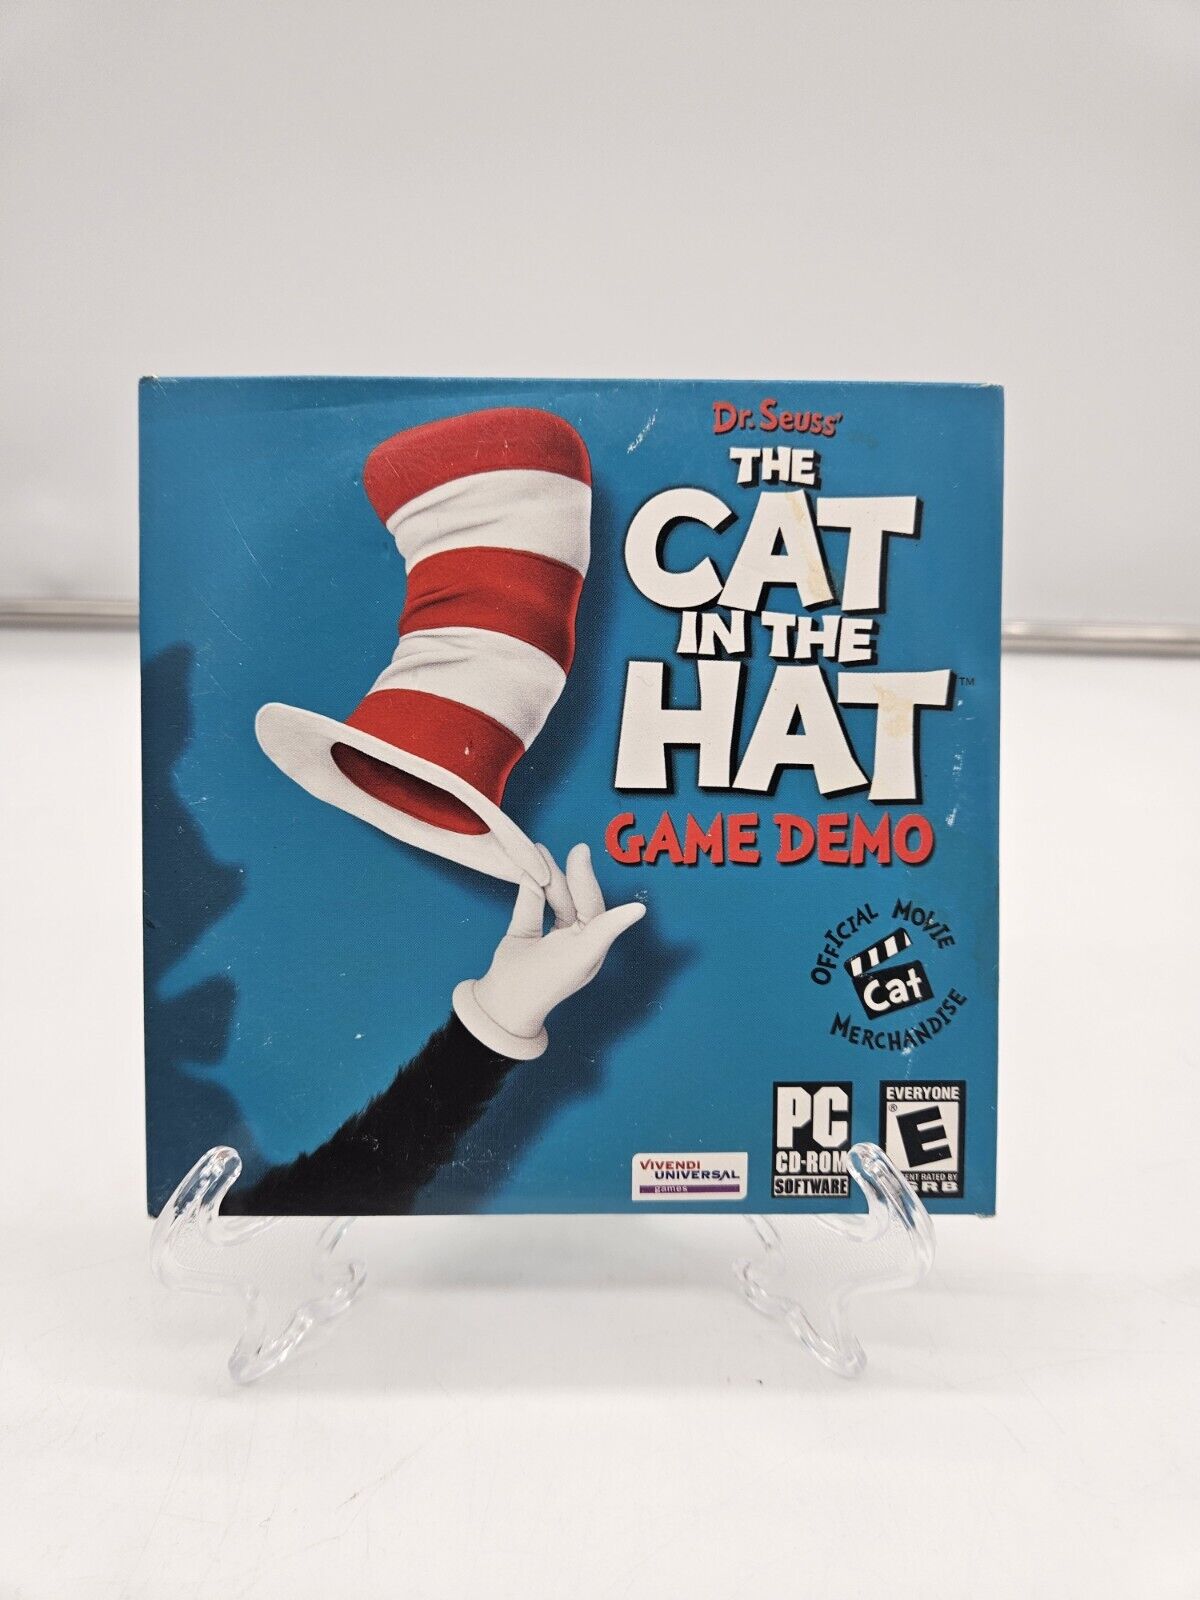 Dr. Seuss The Cat in the Hat - Windows PC CD-ROM Game 2002 Rare Demo Disc 